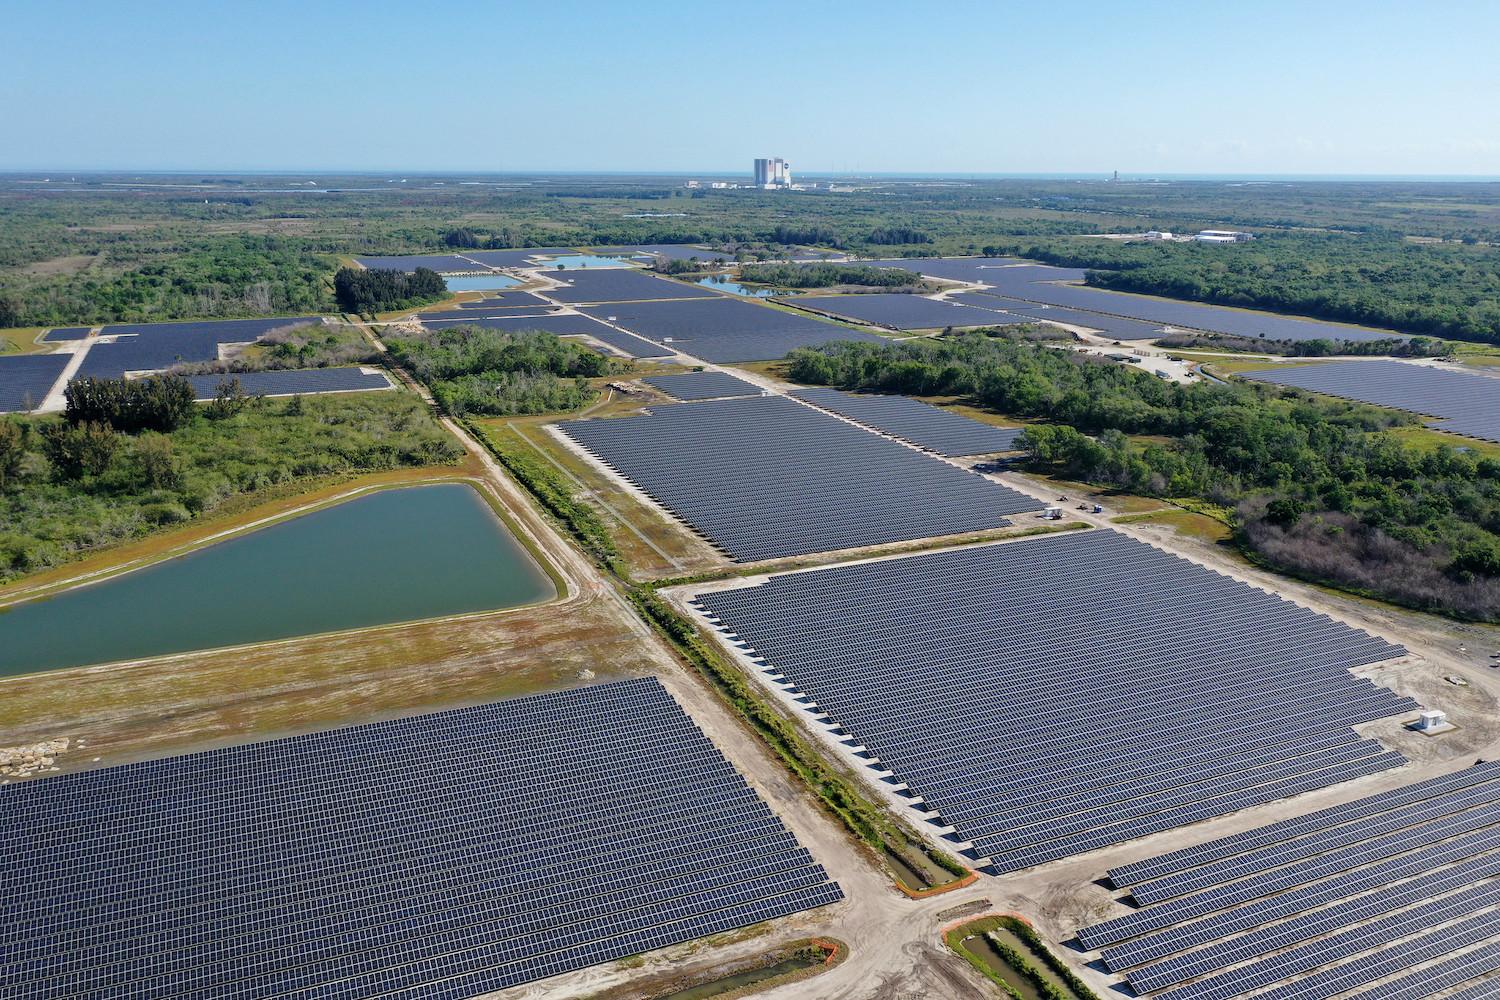 rural clean energy - solar installation in rural area of central florida